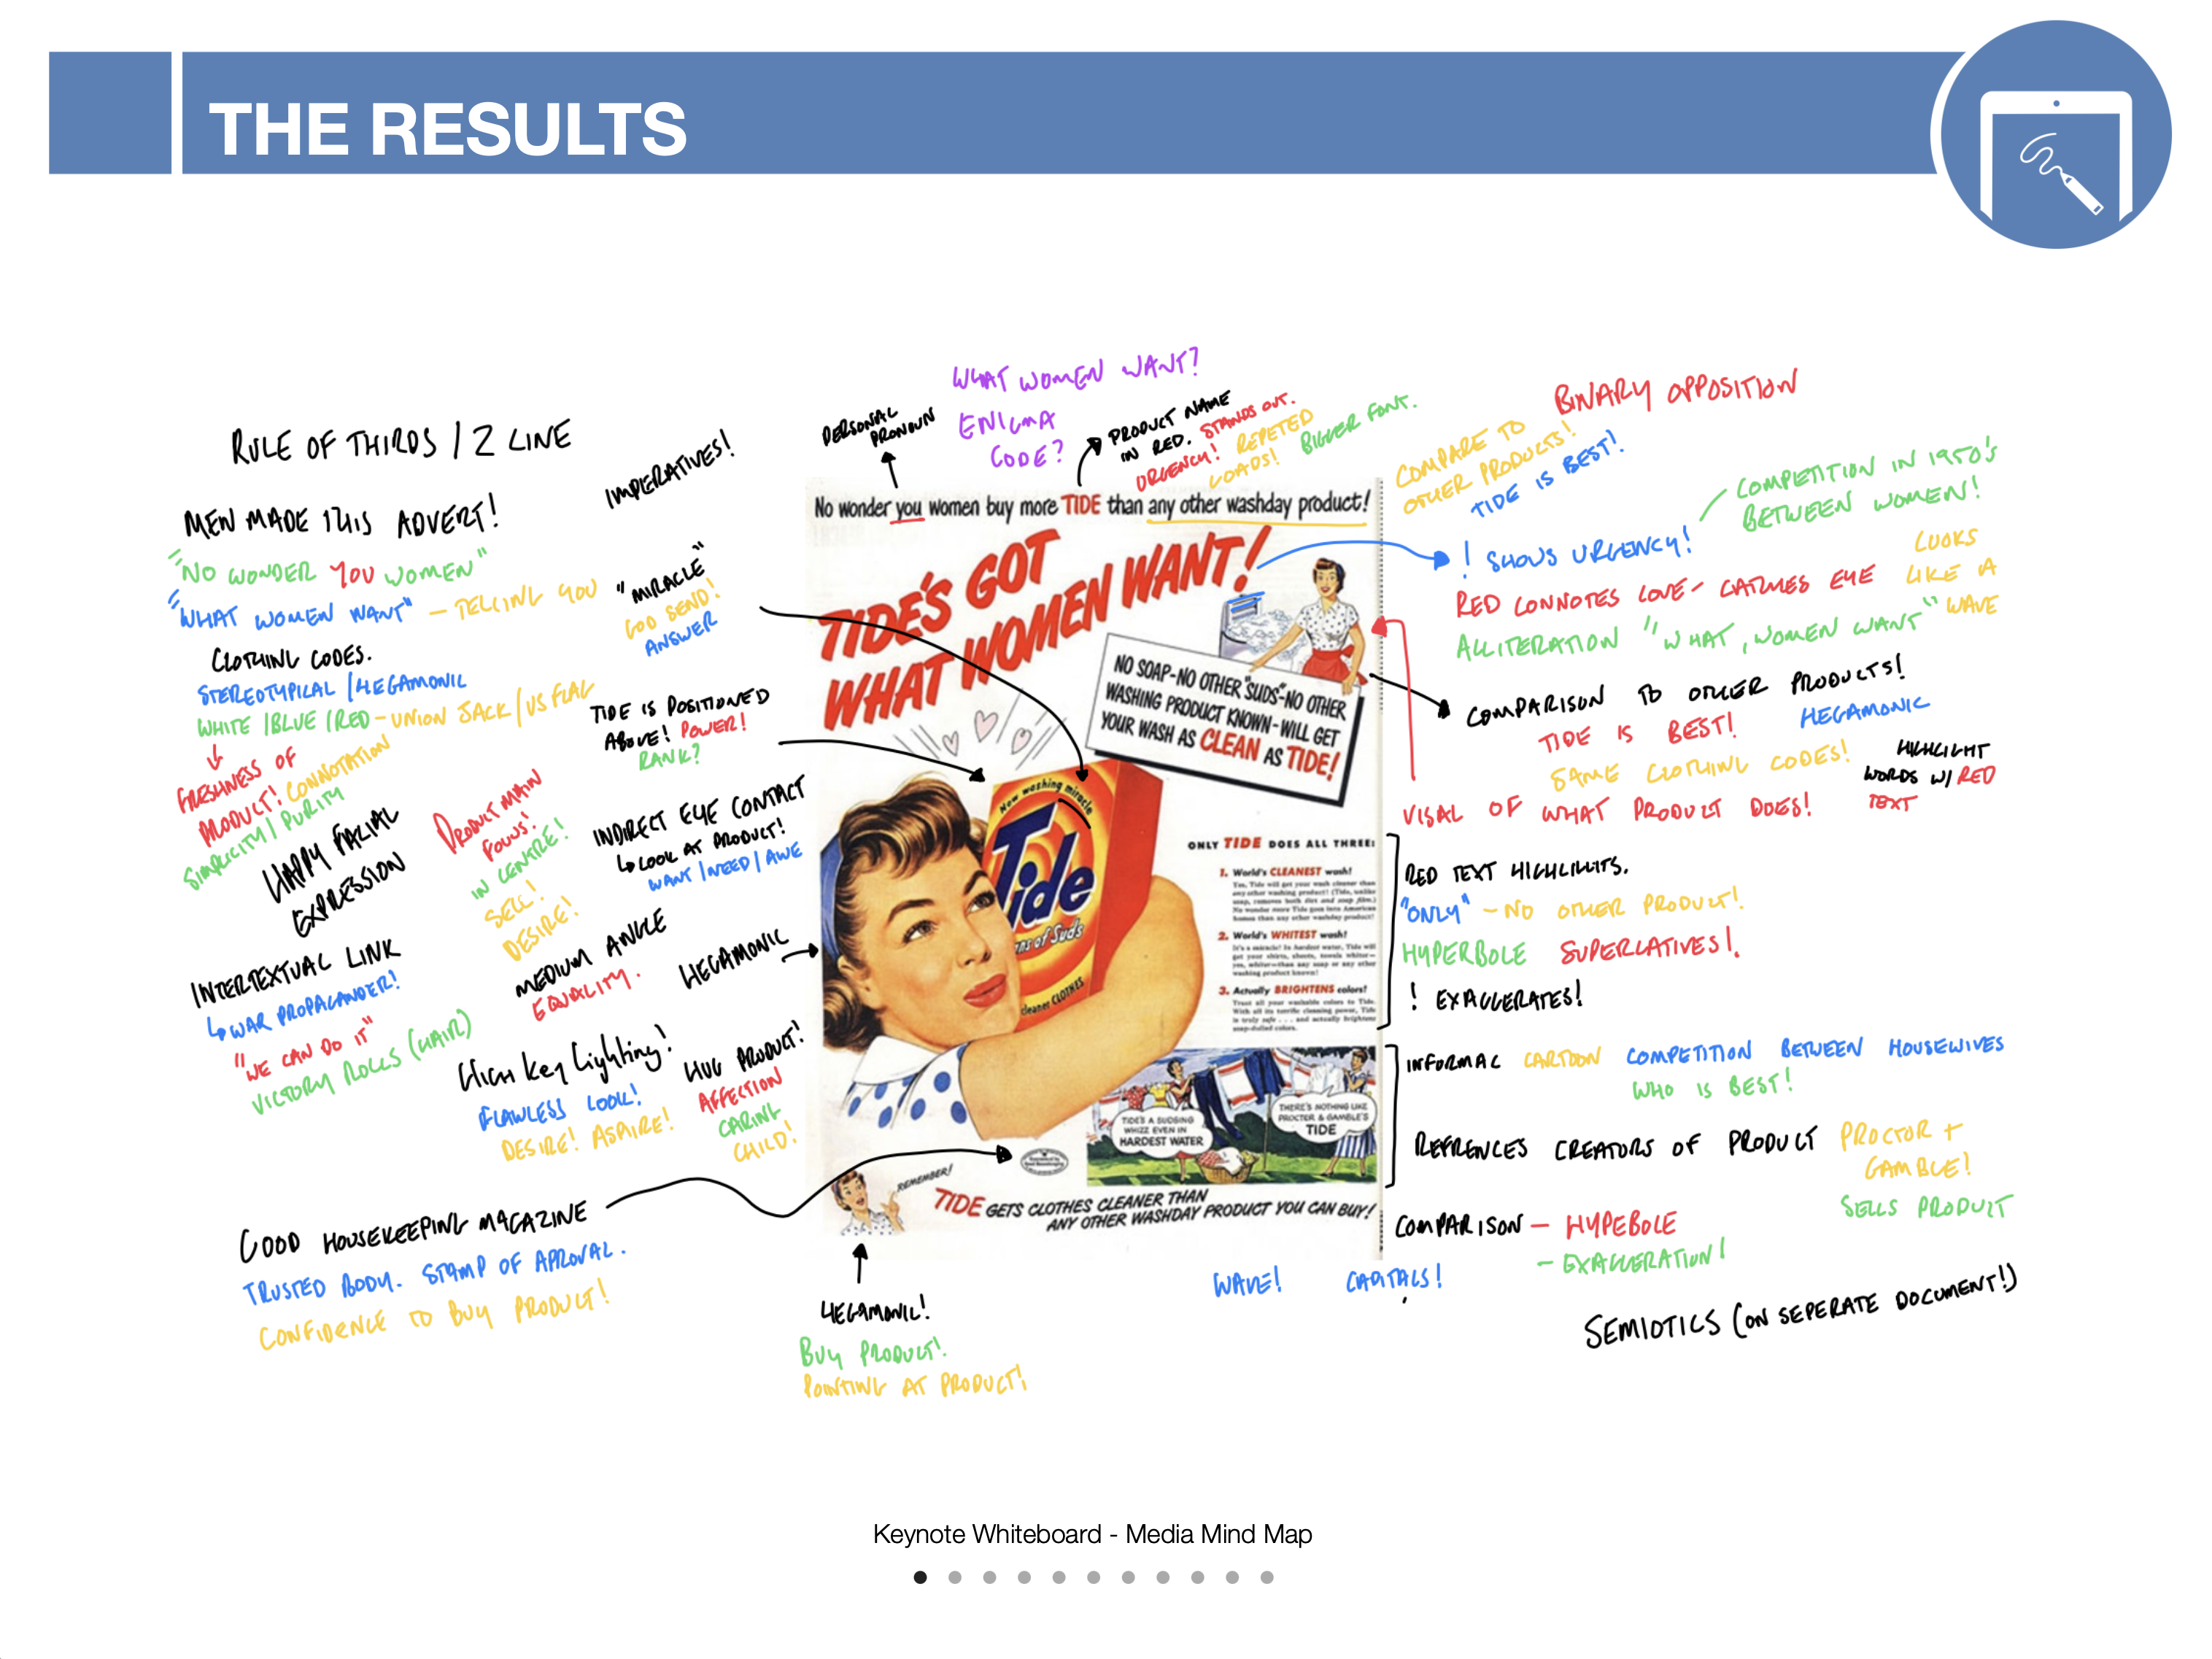 Example mind map from Media Studies using Keynote as a digital whiteboard